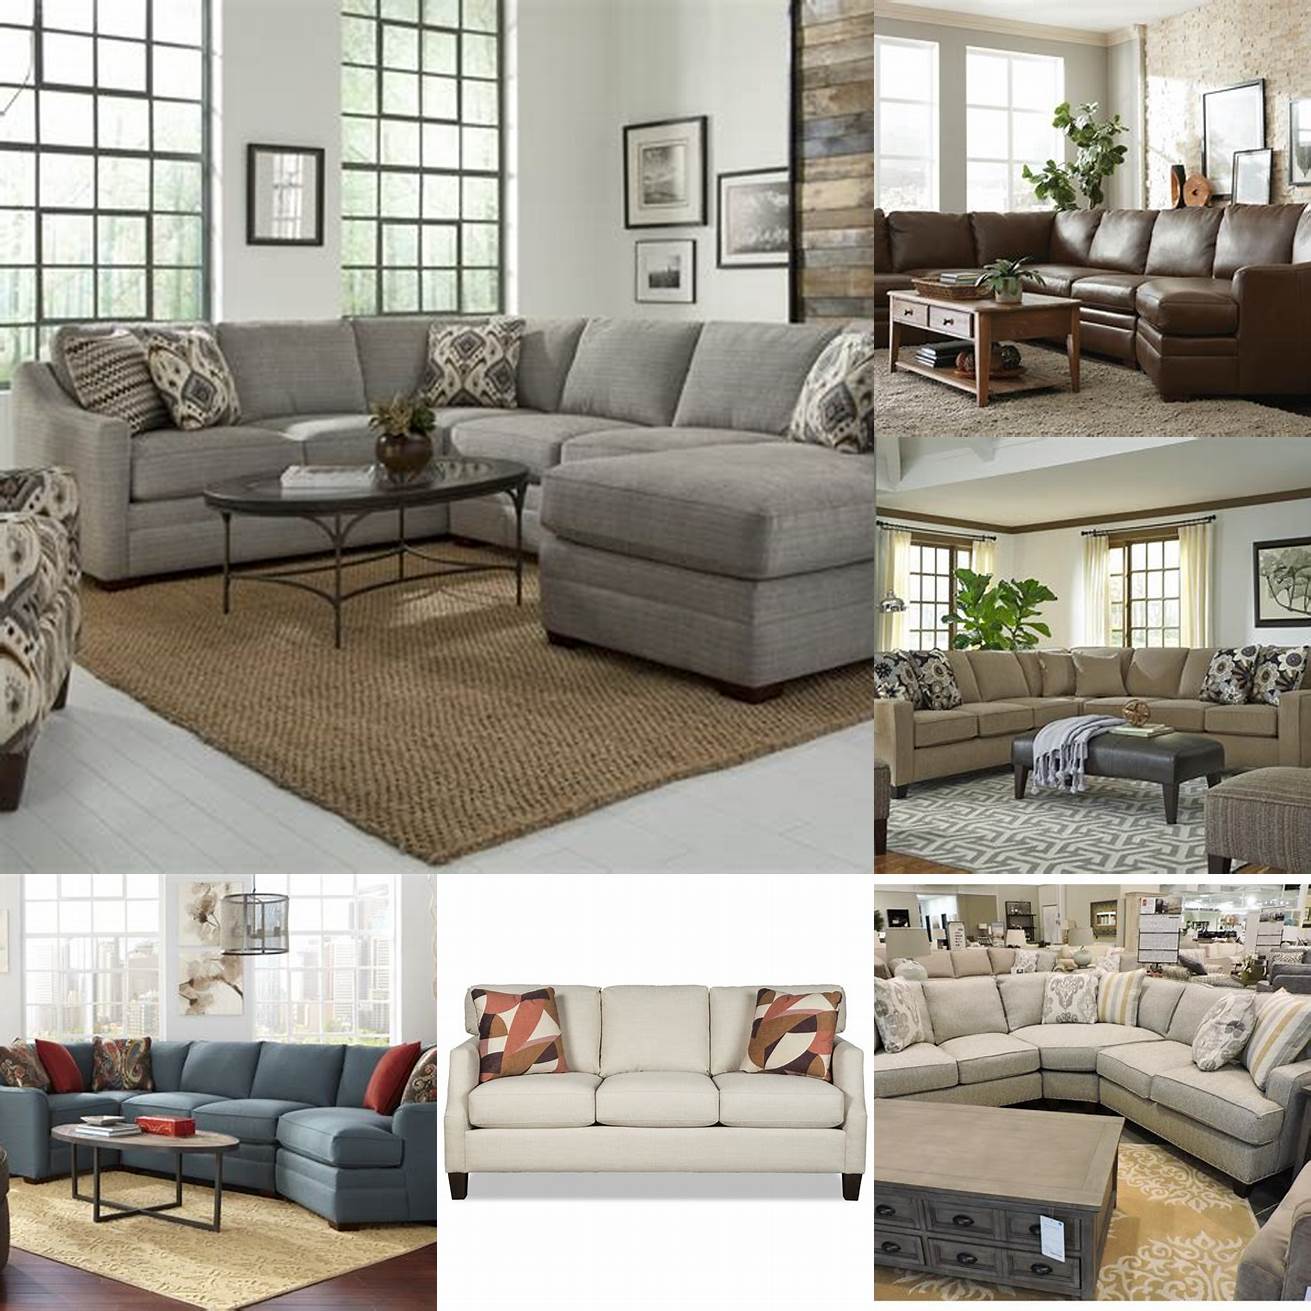 Customizable options available from many furniture manufacturers